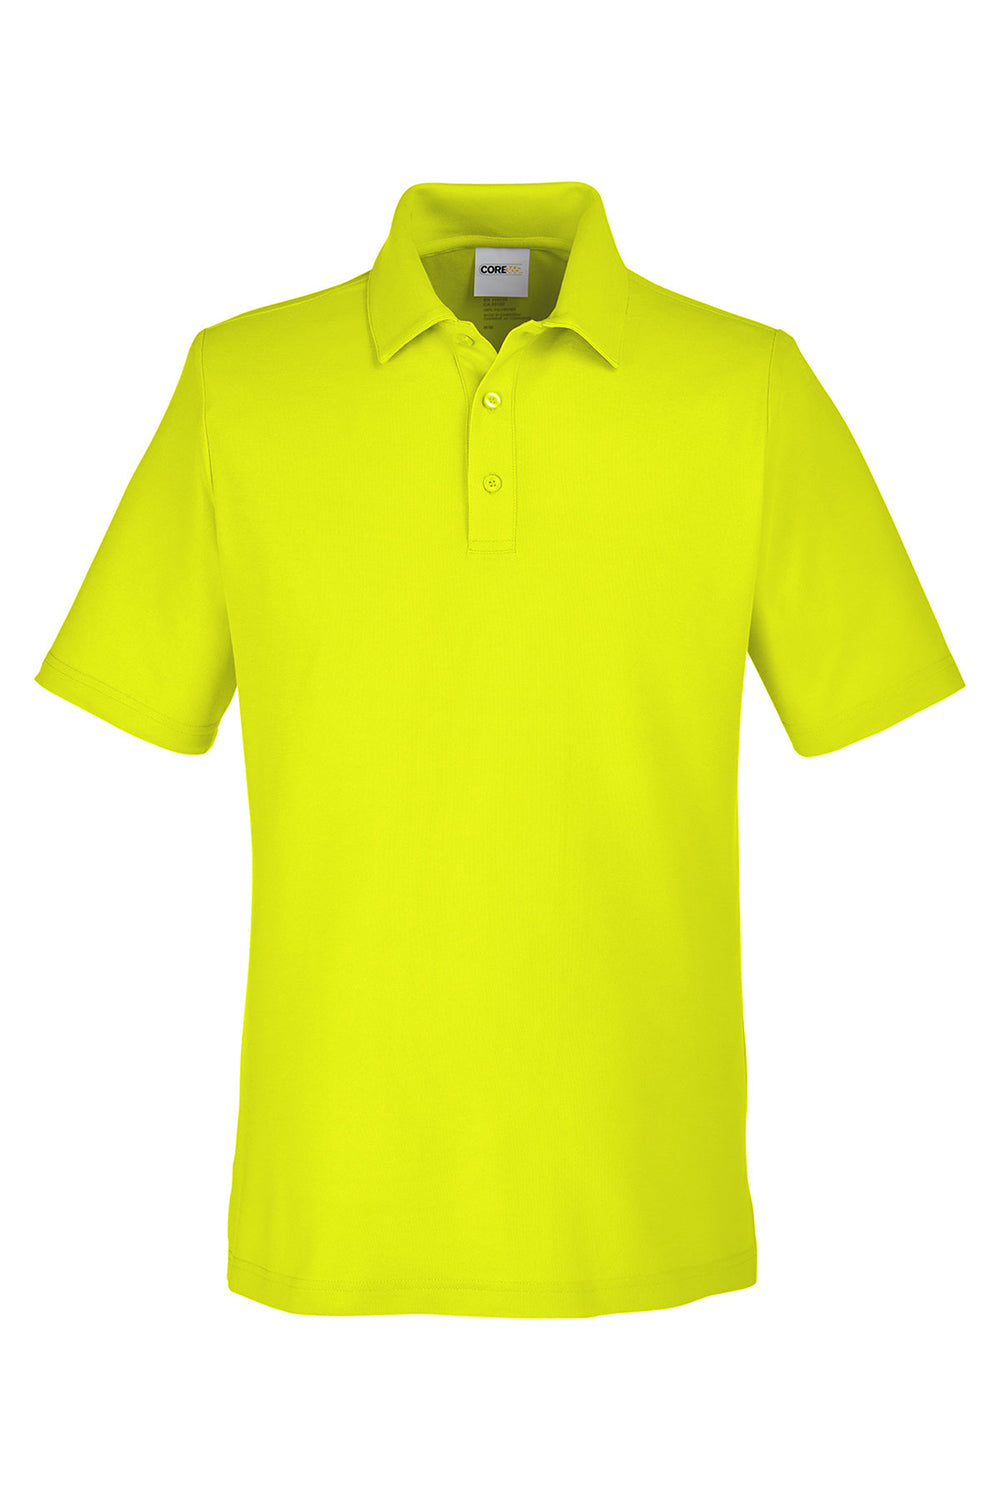 Core 365 CE112 Mens Fusion ChromaSoft Performance Moisture Wicking Short Sleeve Polo Shirt Safety Yellow Flat Front